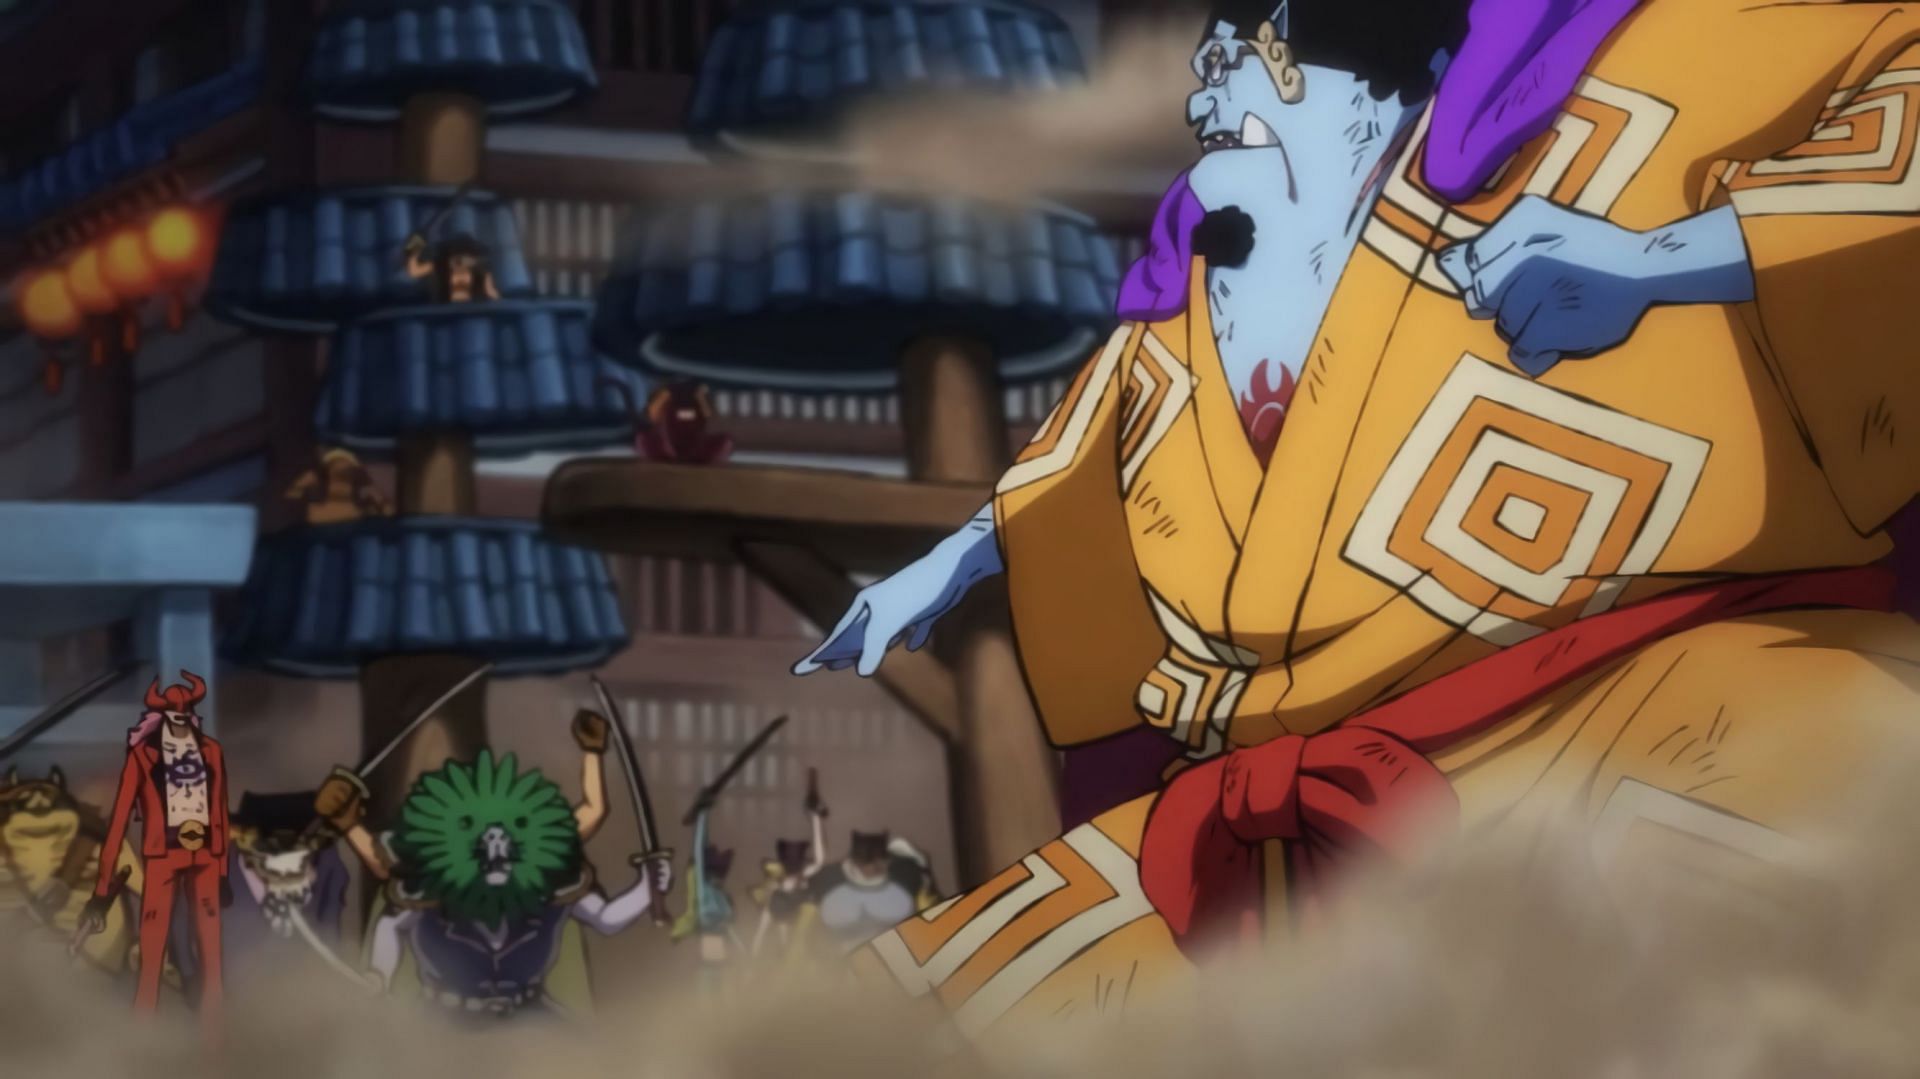 Jimbei fighitng Whose Who in One Piece episode 1038 (Image via Toei Animation)